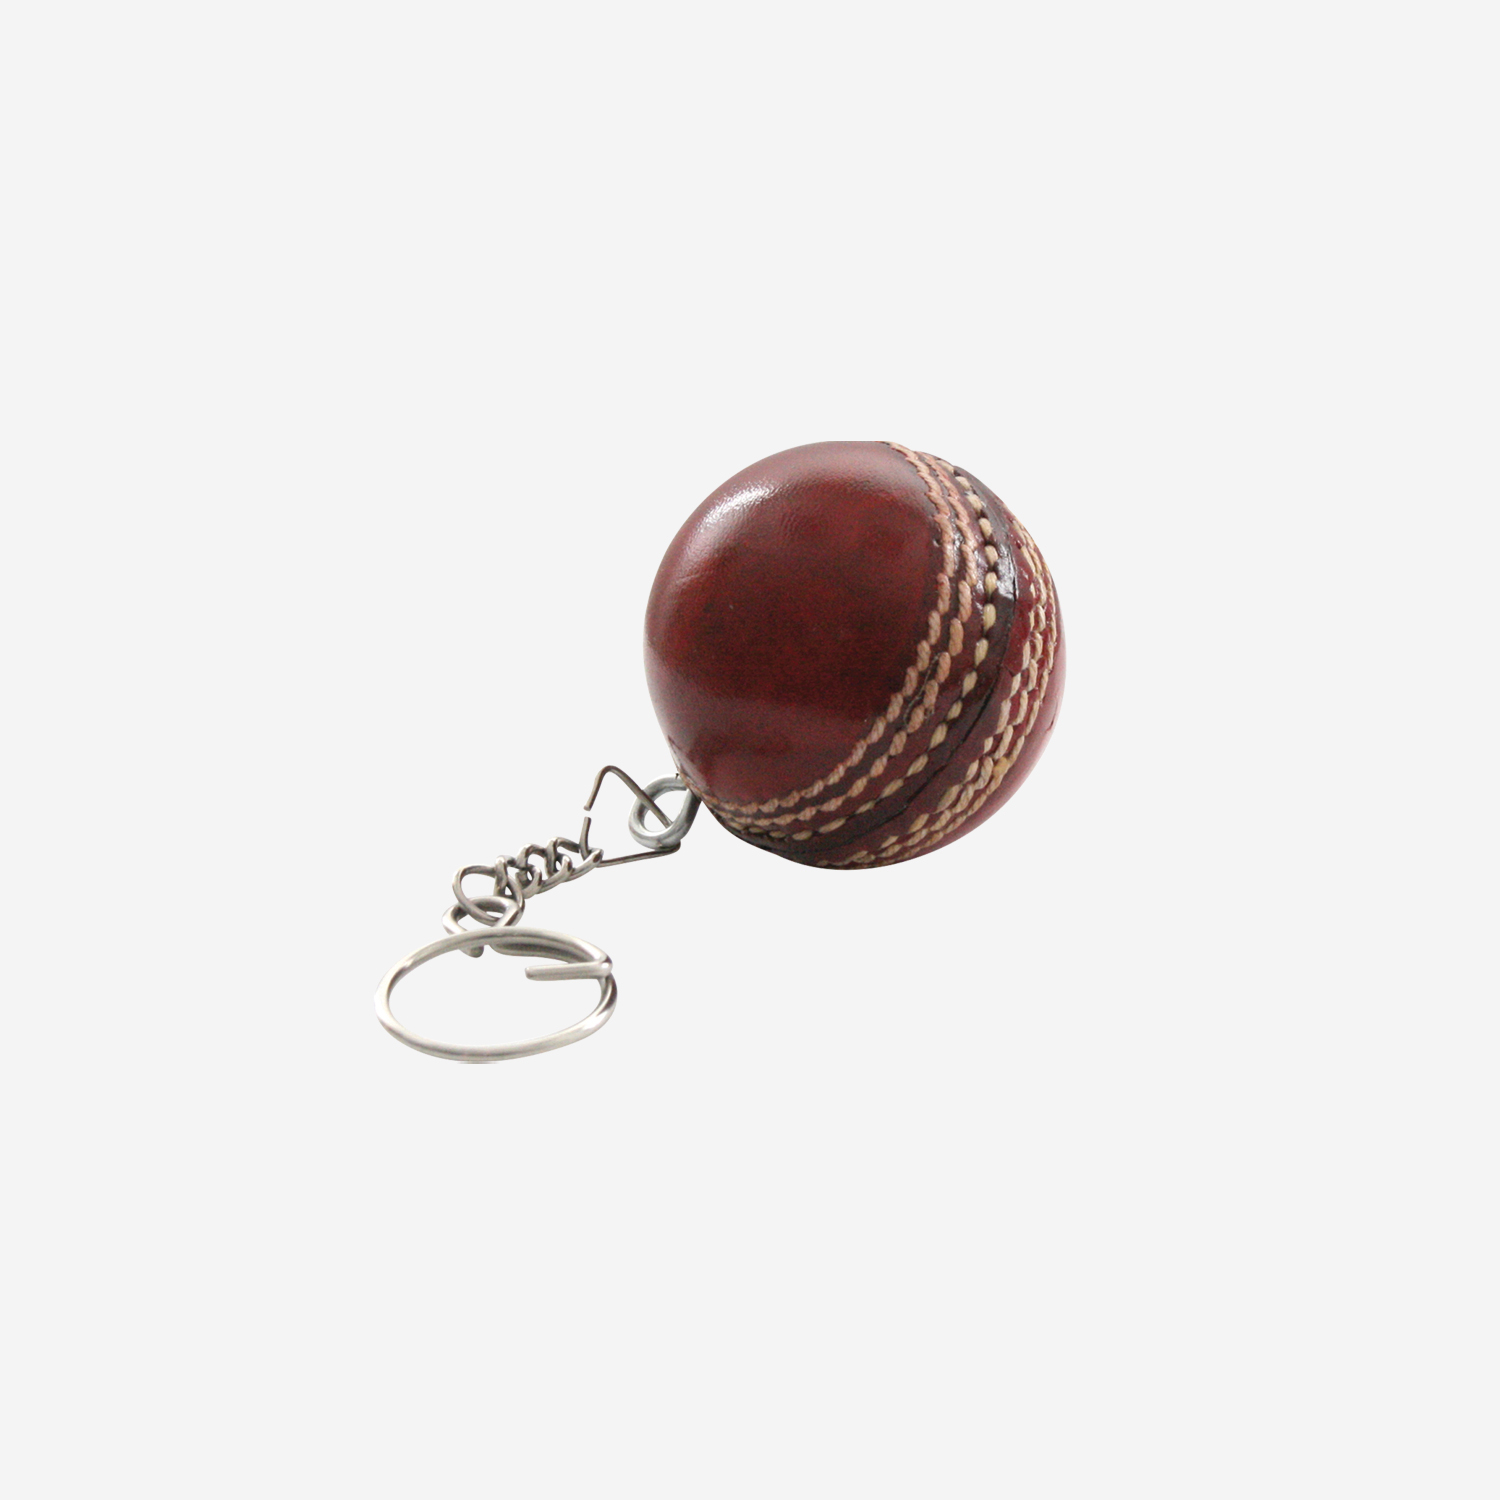 Leather Cricket Ball Key Ring